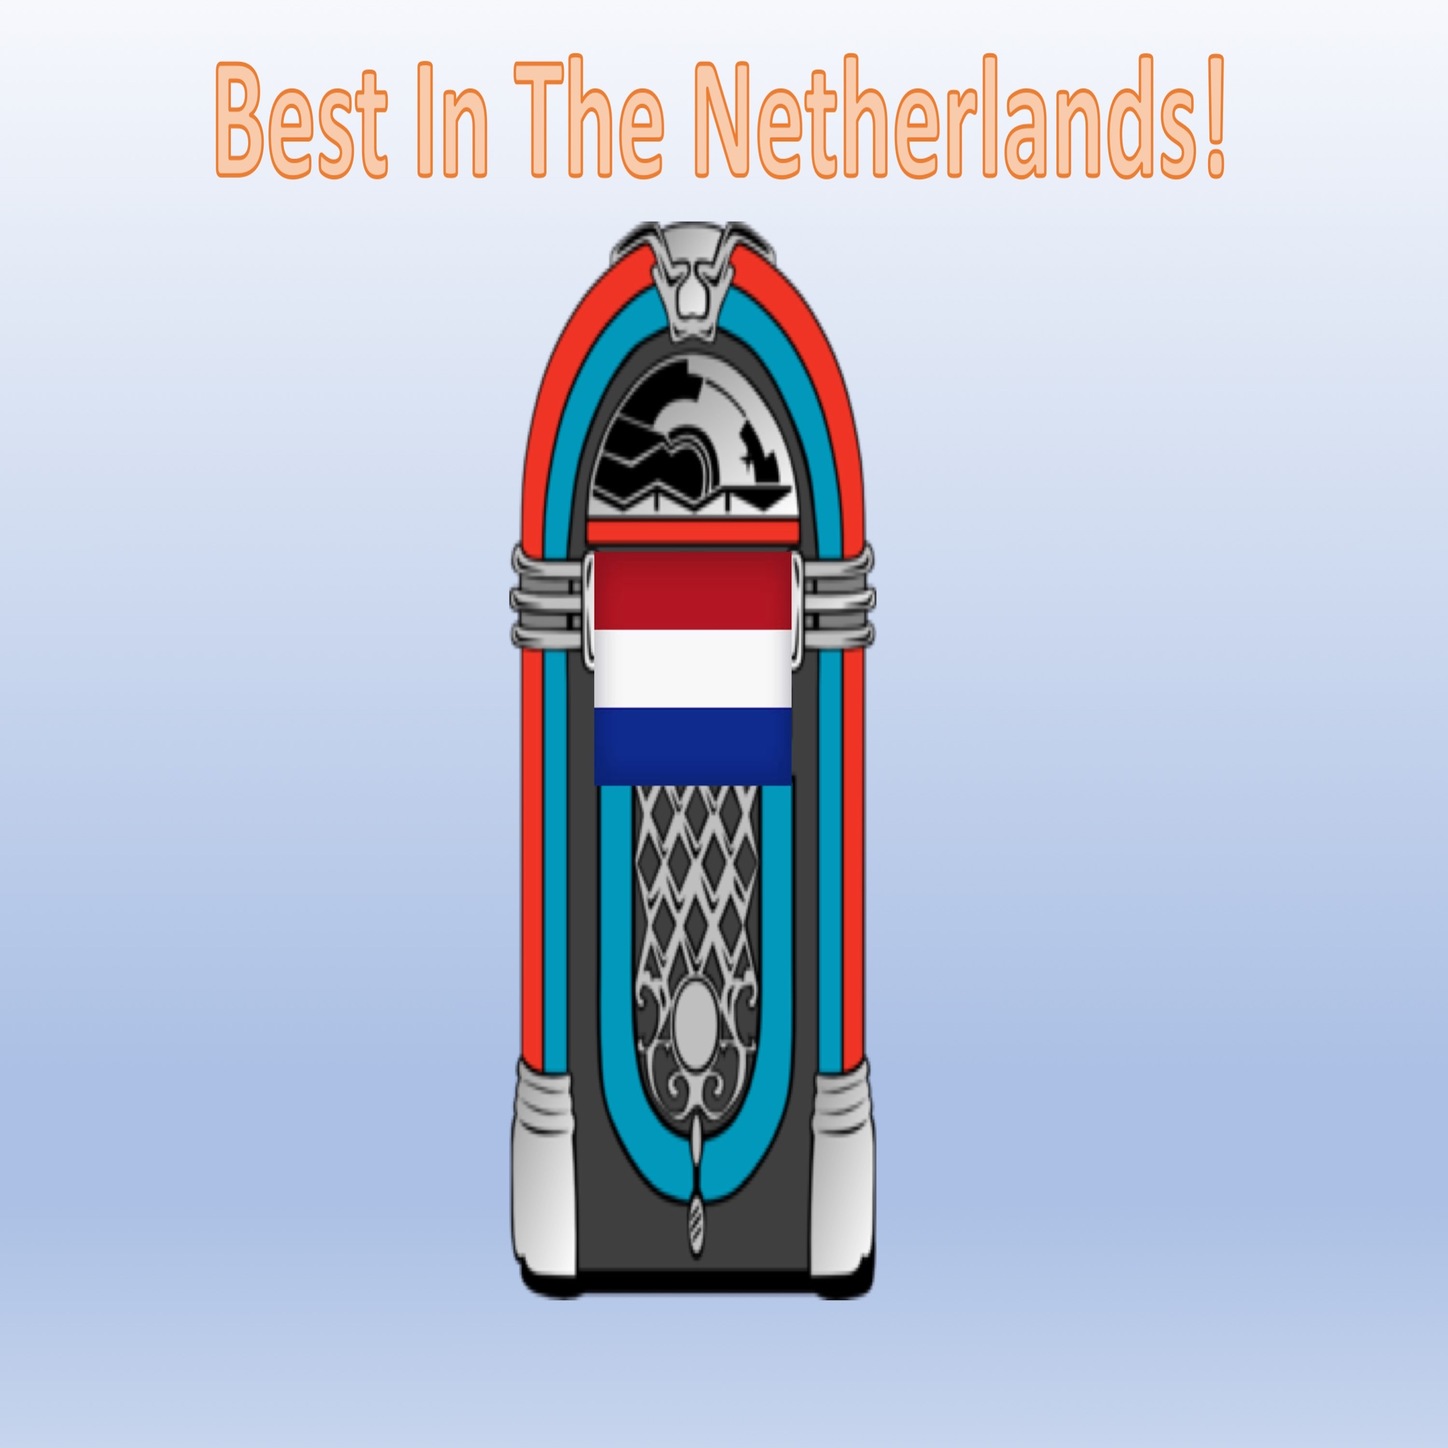 Best In The Netherlands 1963: Top Hits on the Charts